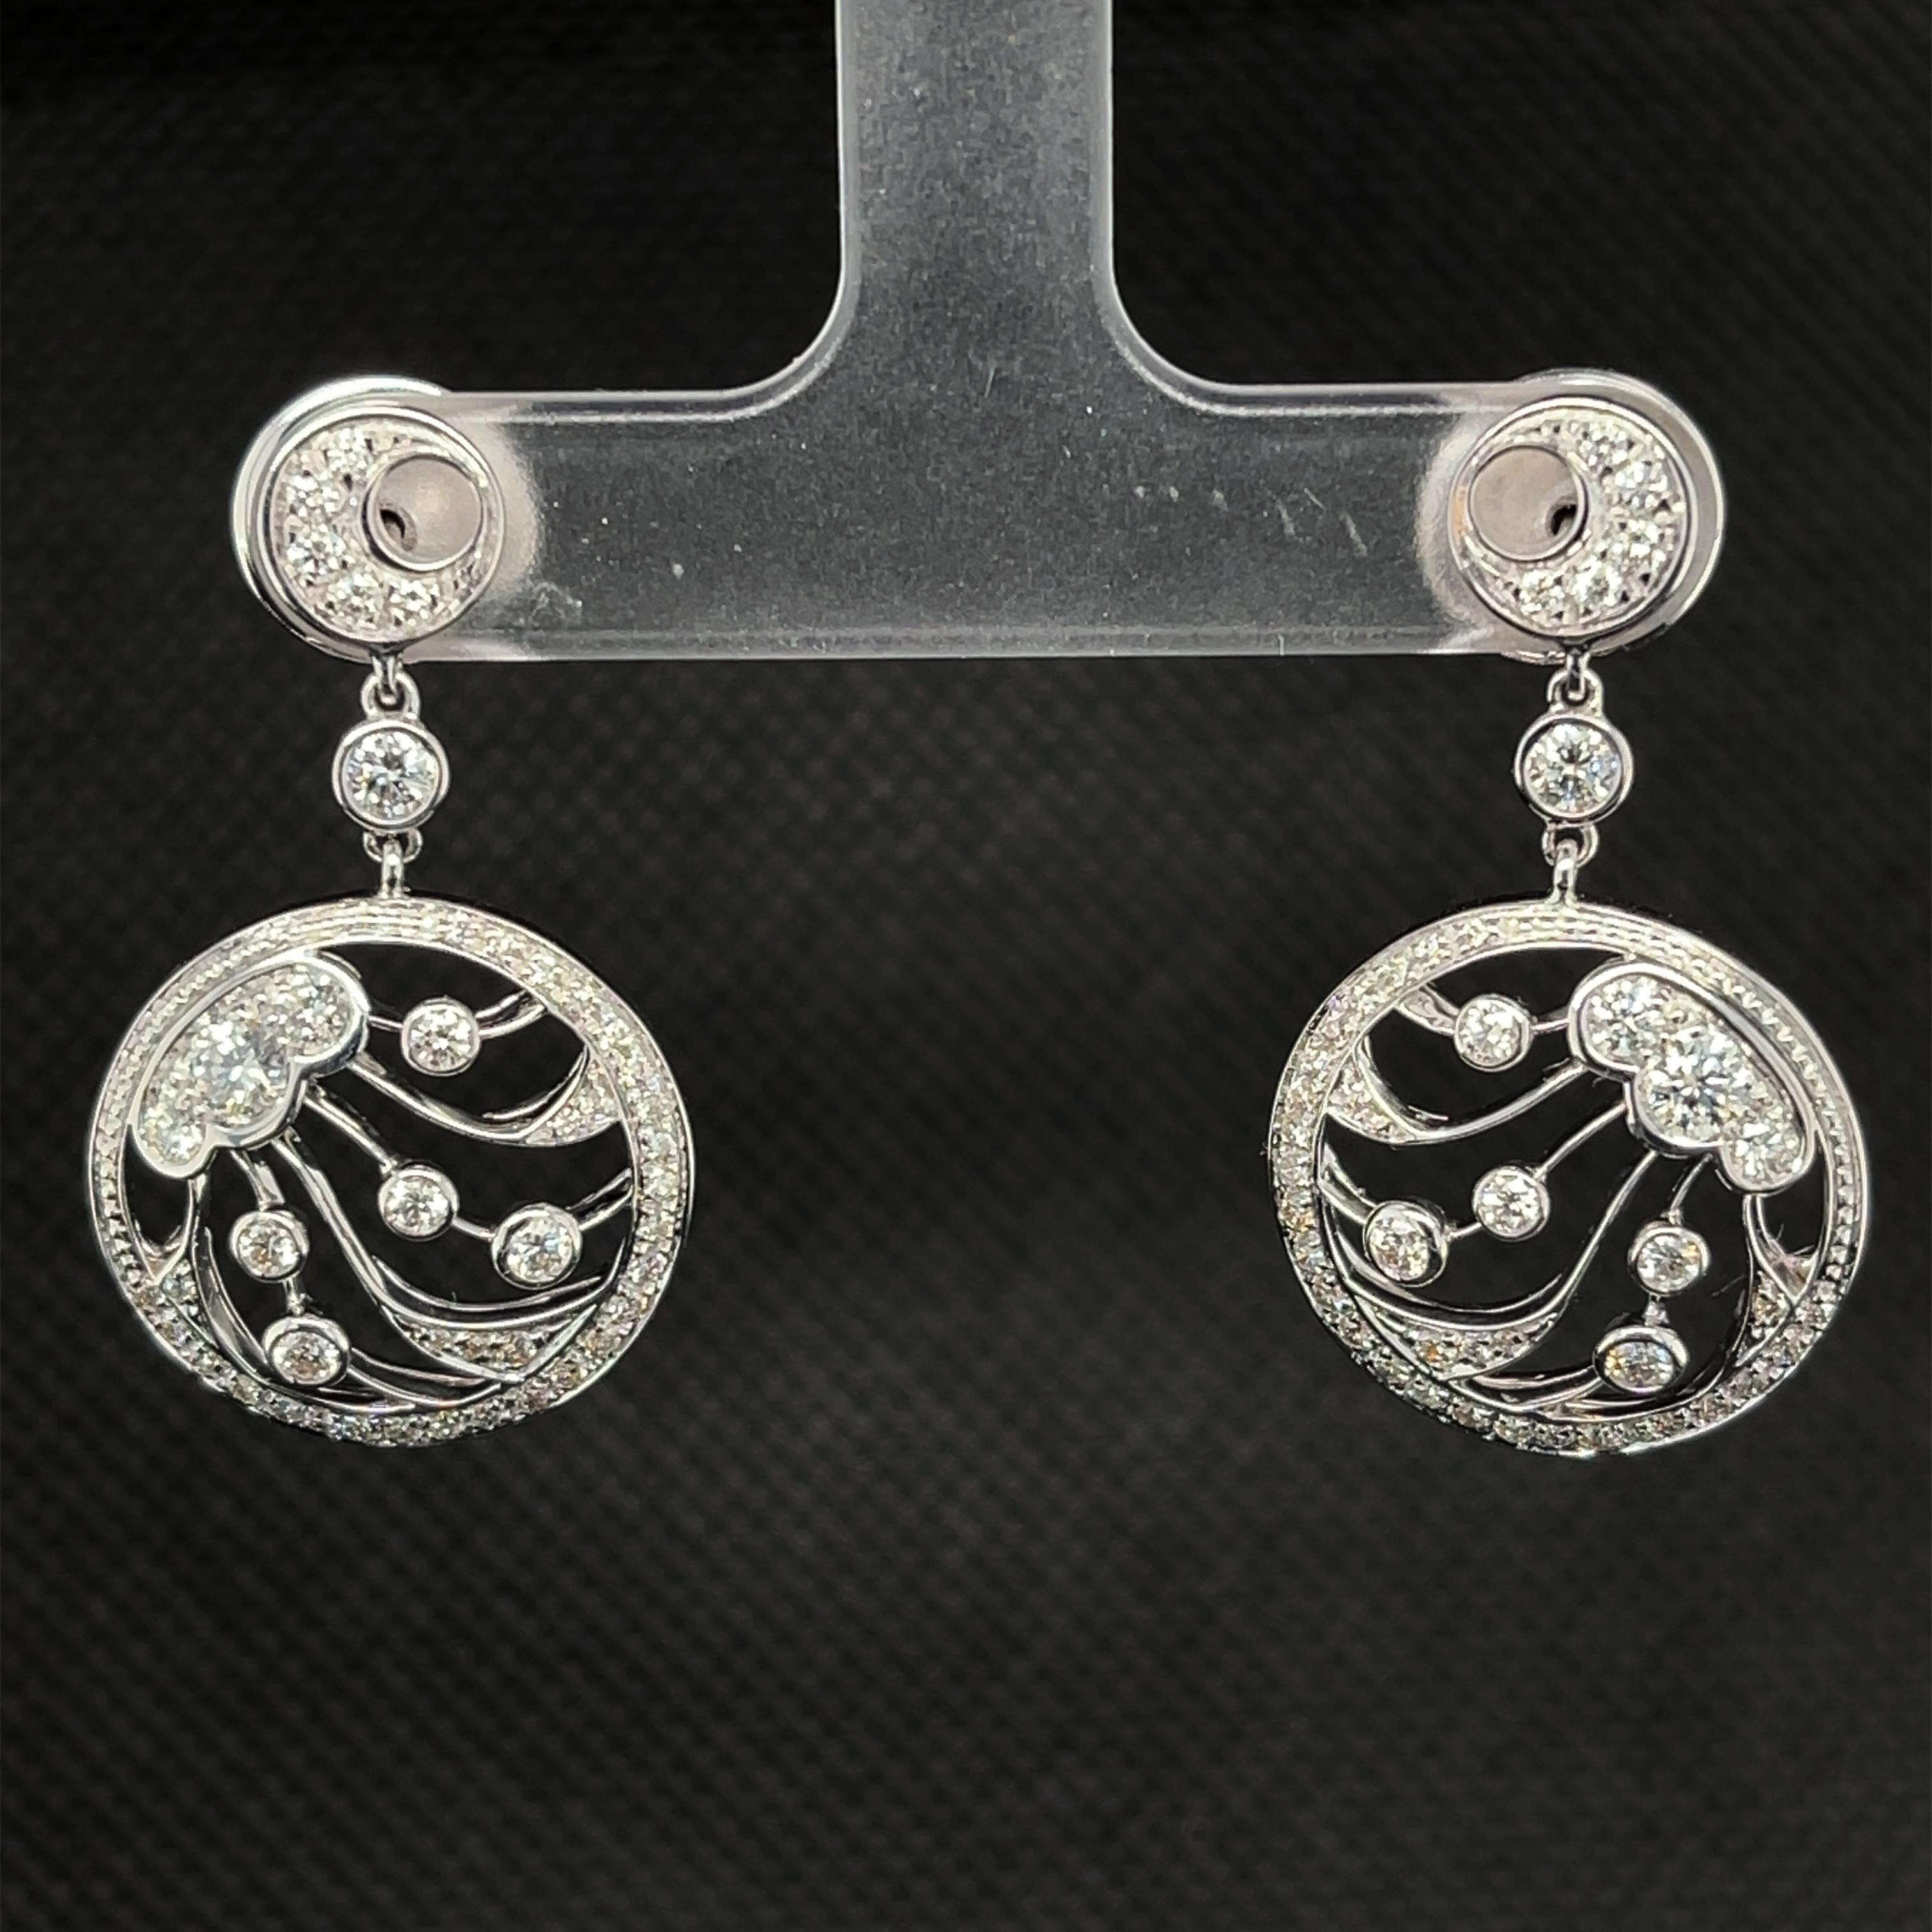 Round Cut Luca Carati Italian White Gold Drop Earrings with Diamonds, 1.24 Carat Total  For Sale